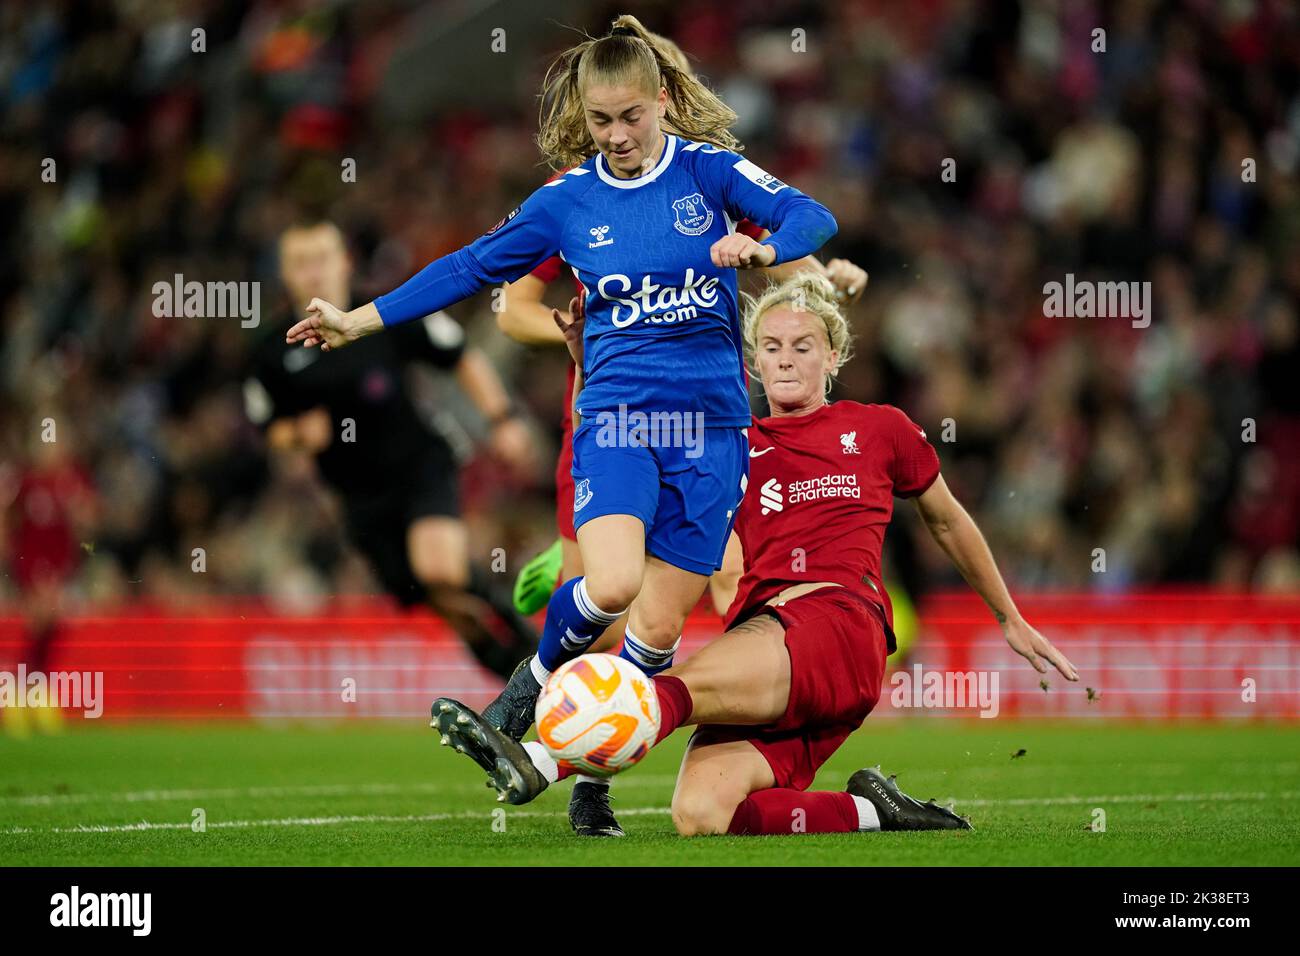 Everton’s Jess Park is tackled by Liverpool's Jasmine Matthews during the Barclays Women's Super League match at Anfield, Liverpool. Picture date: Saturday September 24, 2022. Stock Photo